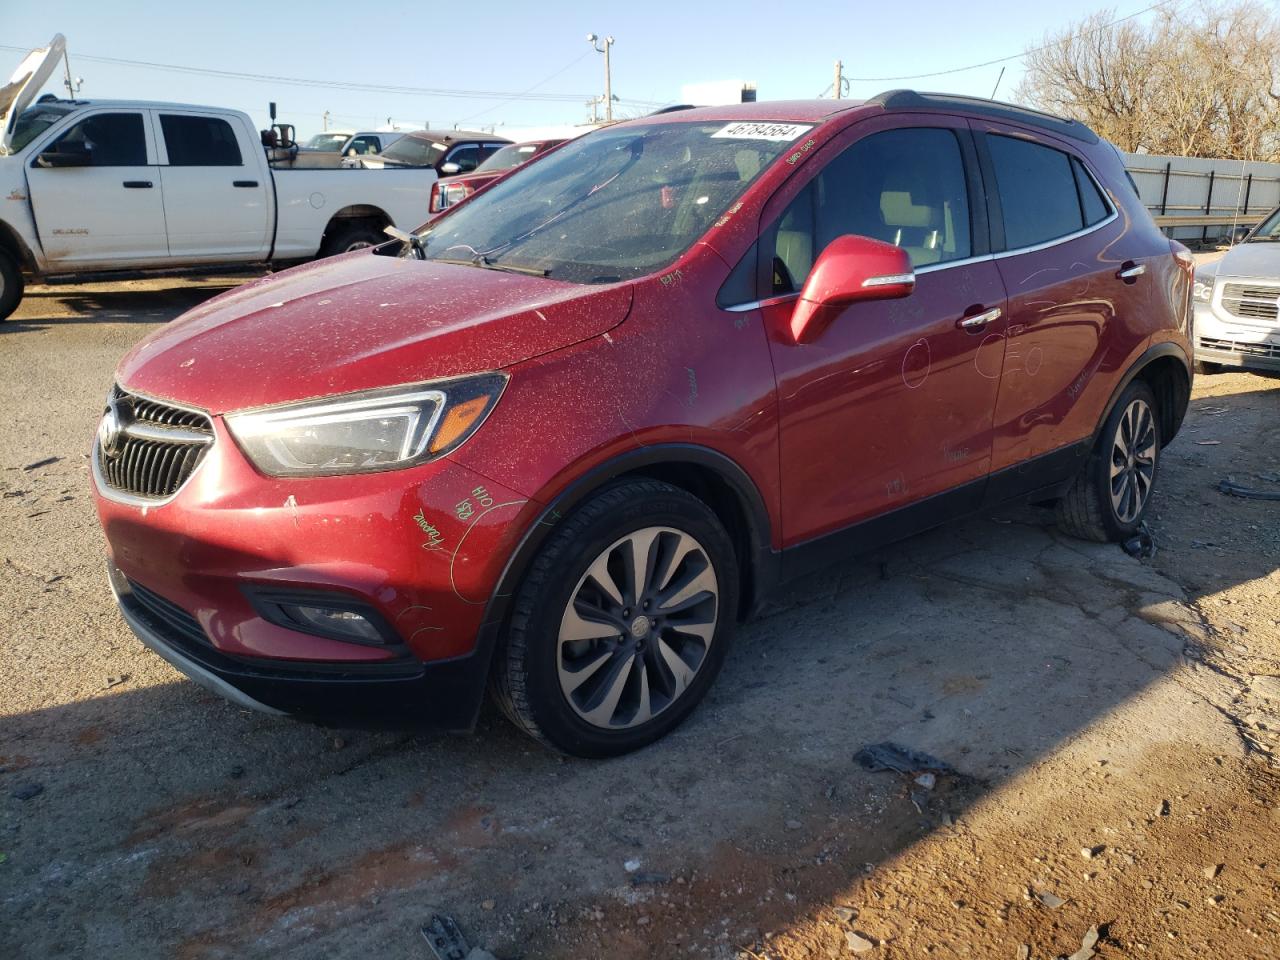 vin: KL4CJCSB1HB111466 KL4CJCSB1HB111466 2017 buick encore 1400 for Sale in 73129 8450, Ok - Oklahoma City, Oklahoma City, USA